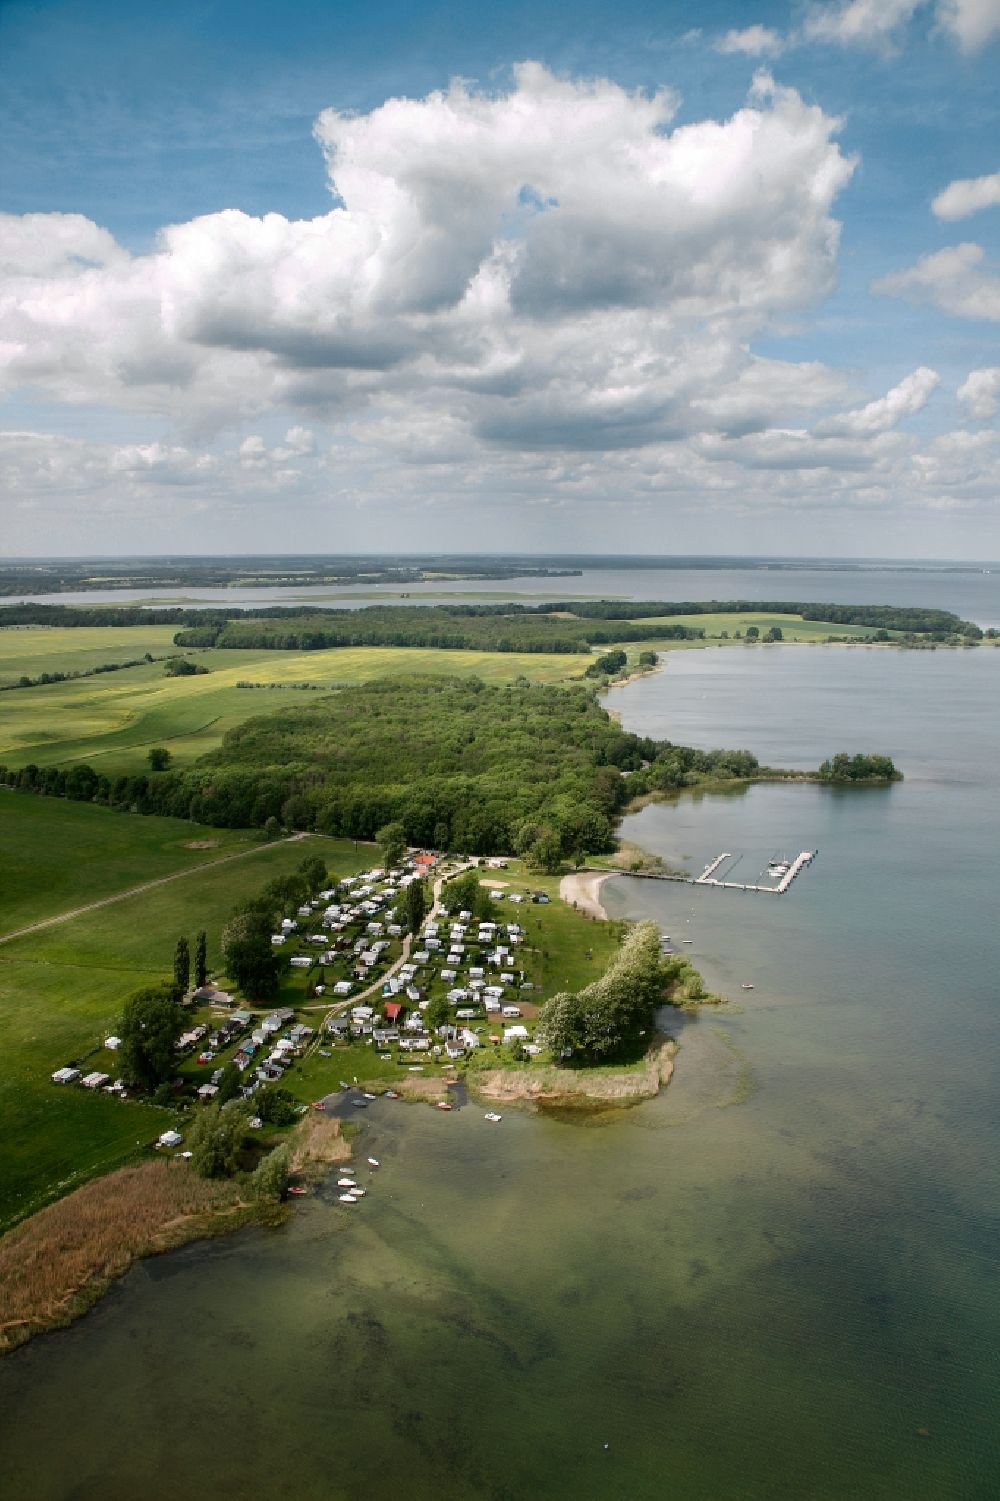 Ludorf from above - Camping on the banks of Lake Mueritz Ludorf in Mecklenburg - West Pomerania